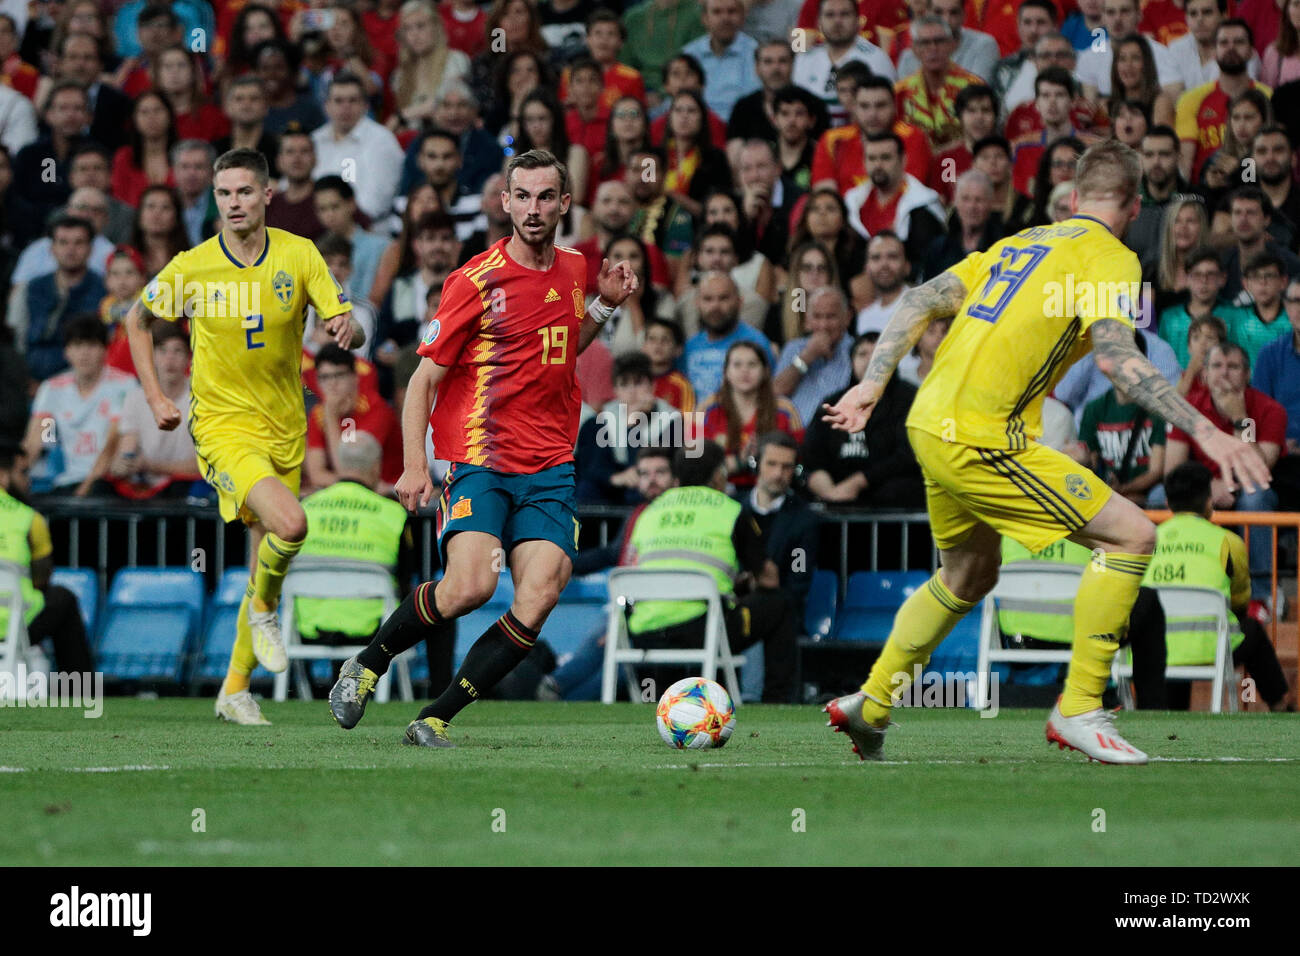 Spain national team player Fabian Ruiz and Sweden national team player Pontus Jansson seen in action during the UEFA EURO 2020 Qualifier match between Spain and Sweden at Santiago Bernabeu Stadium in Madrid. Final score: Spain 3 - Sweden 0 Stock Photo